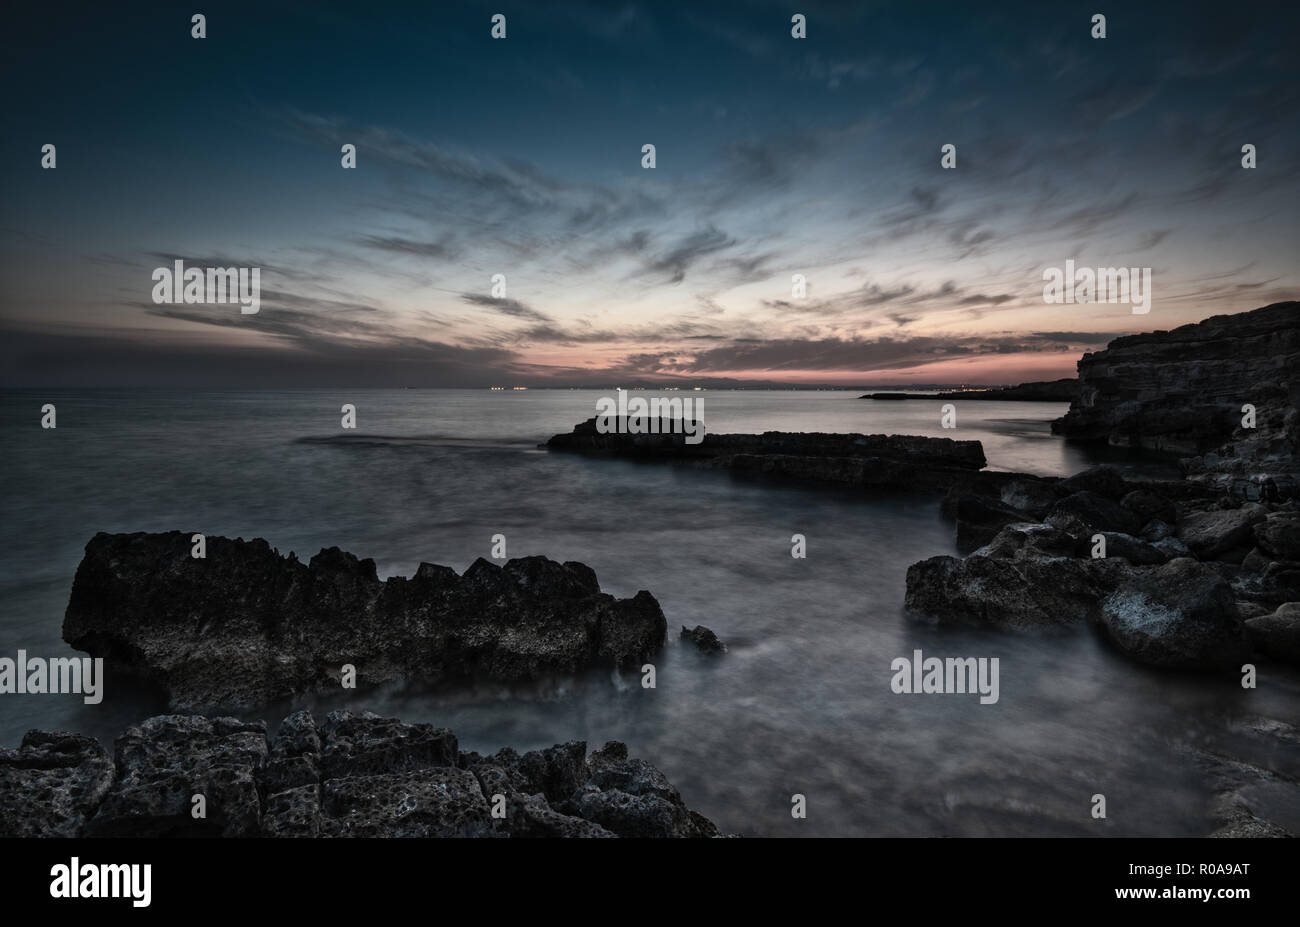 Dramatic sunset on a Rocky coastline with milky water  at Xylofagou area in Cyprus. Long Exposure image Stock Photo